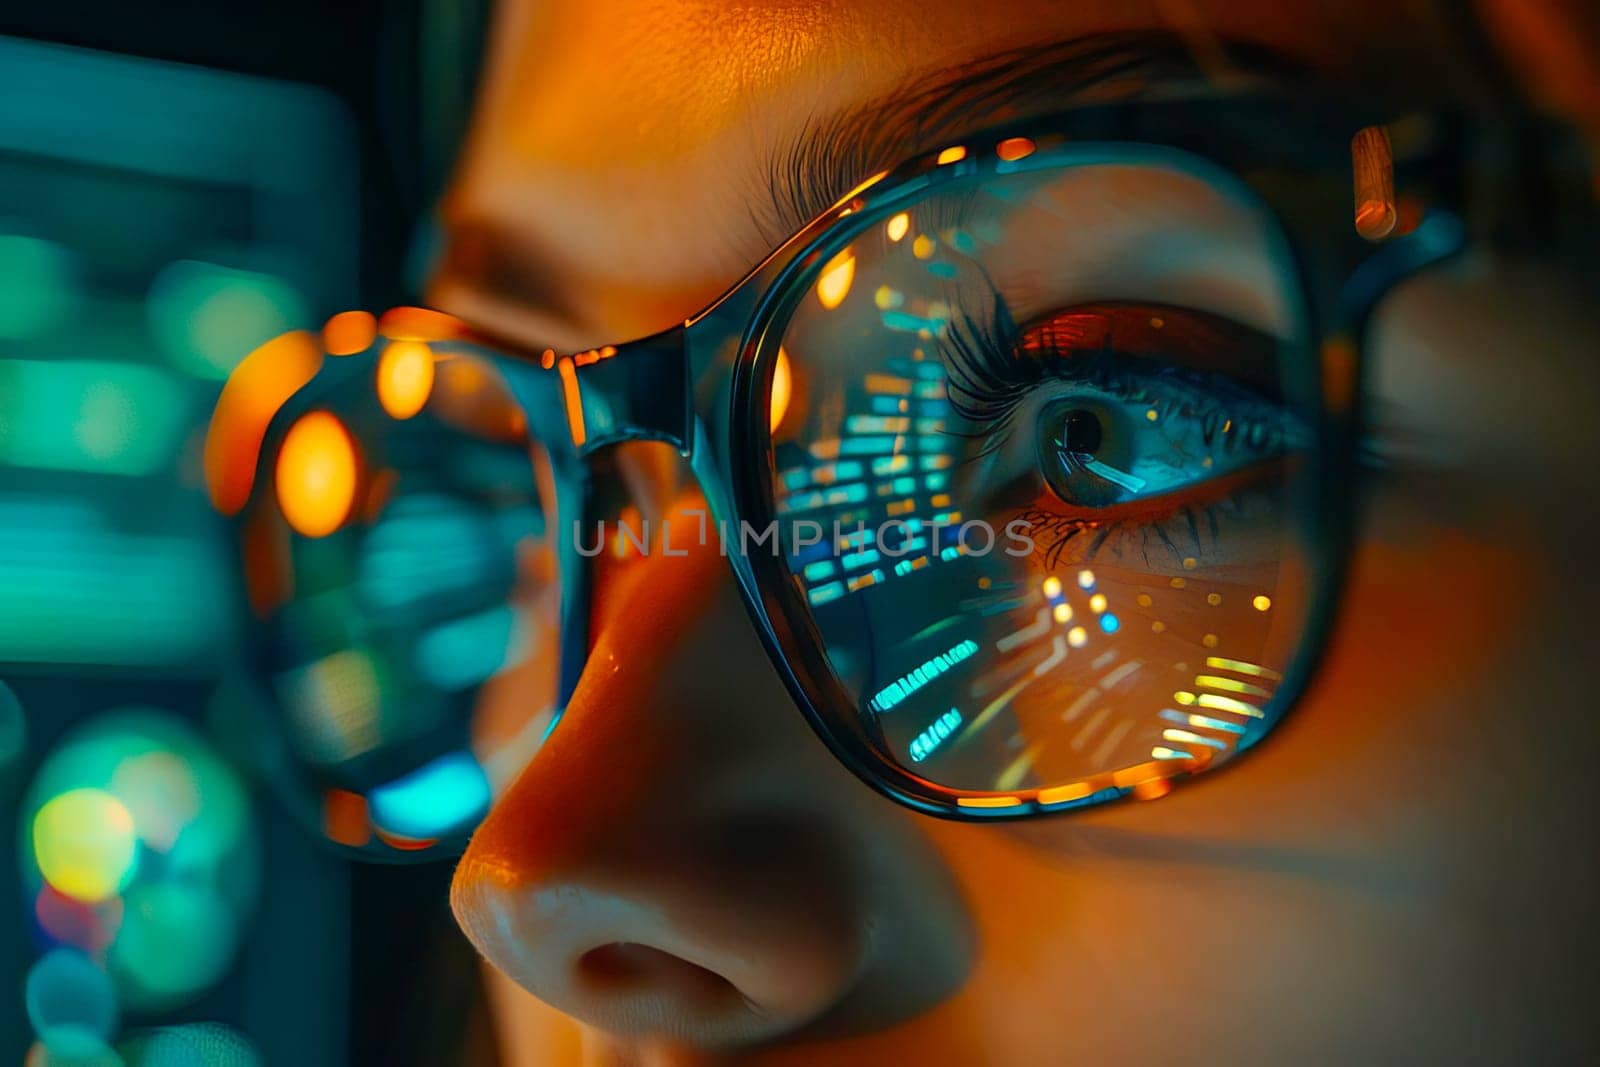 A detailed view of a persons eyes and glasses with a computer monitor reflecting in the lenses. by vladimka